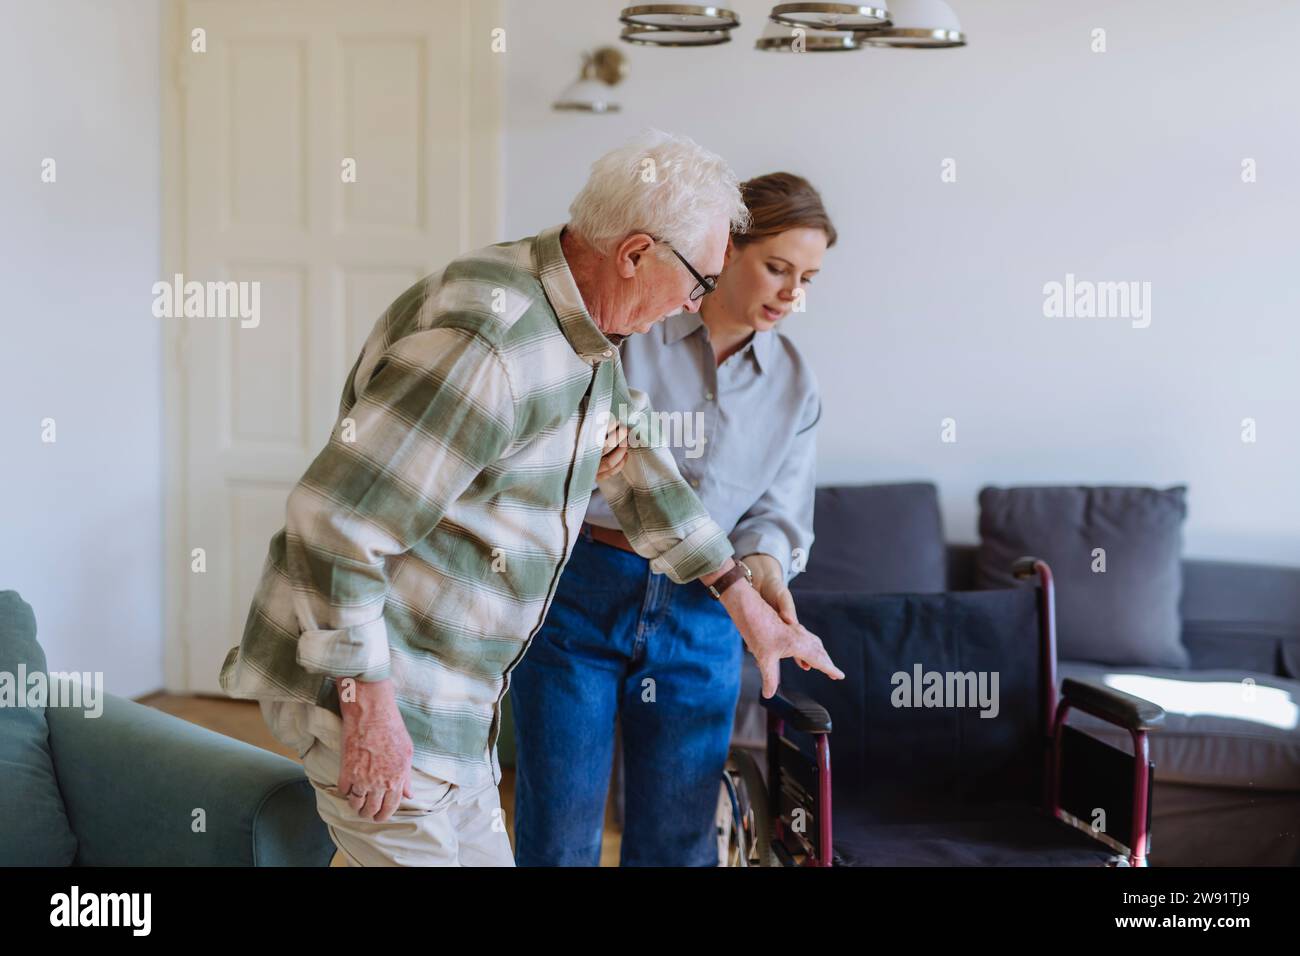 Healthcare worker holding hands and helping man at home Stock Photo